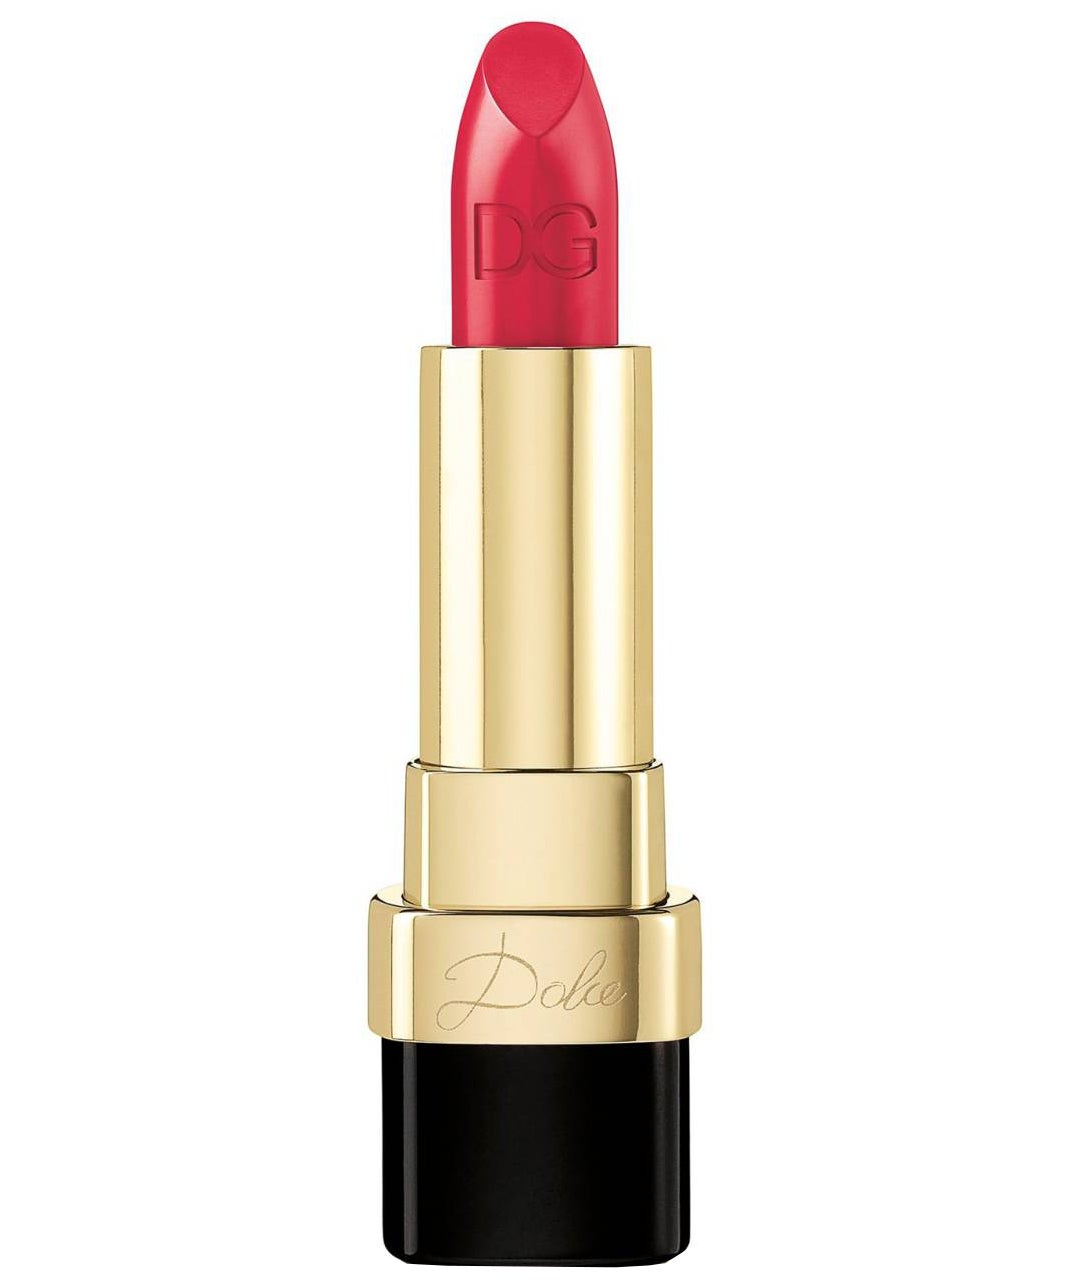 This Is the Most Popular Lipstick On Polyvore—And It's Not MAC
